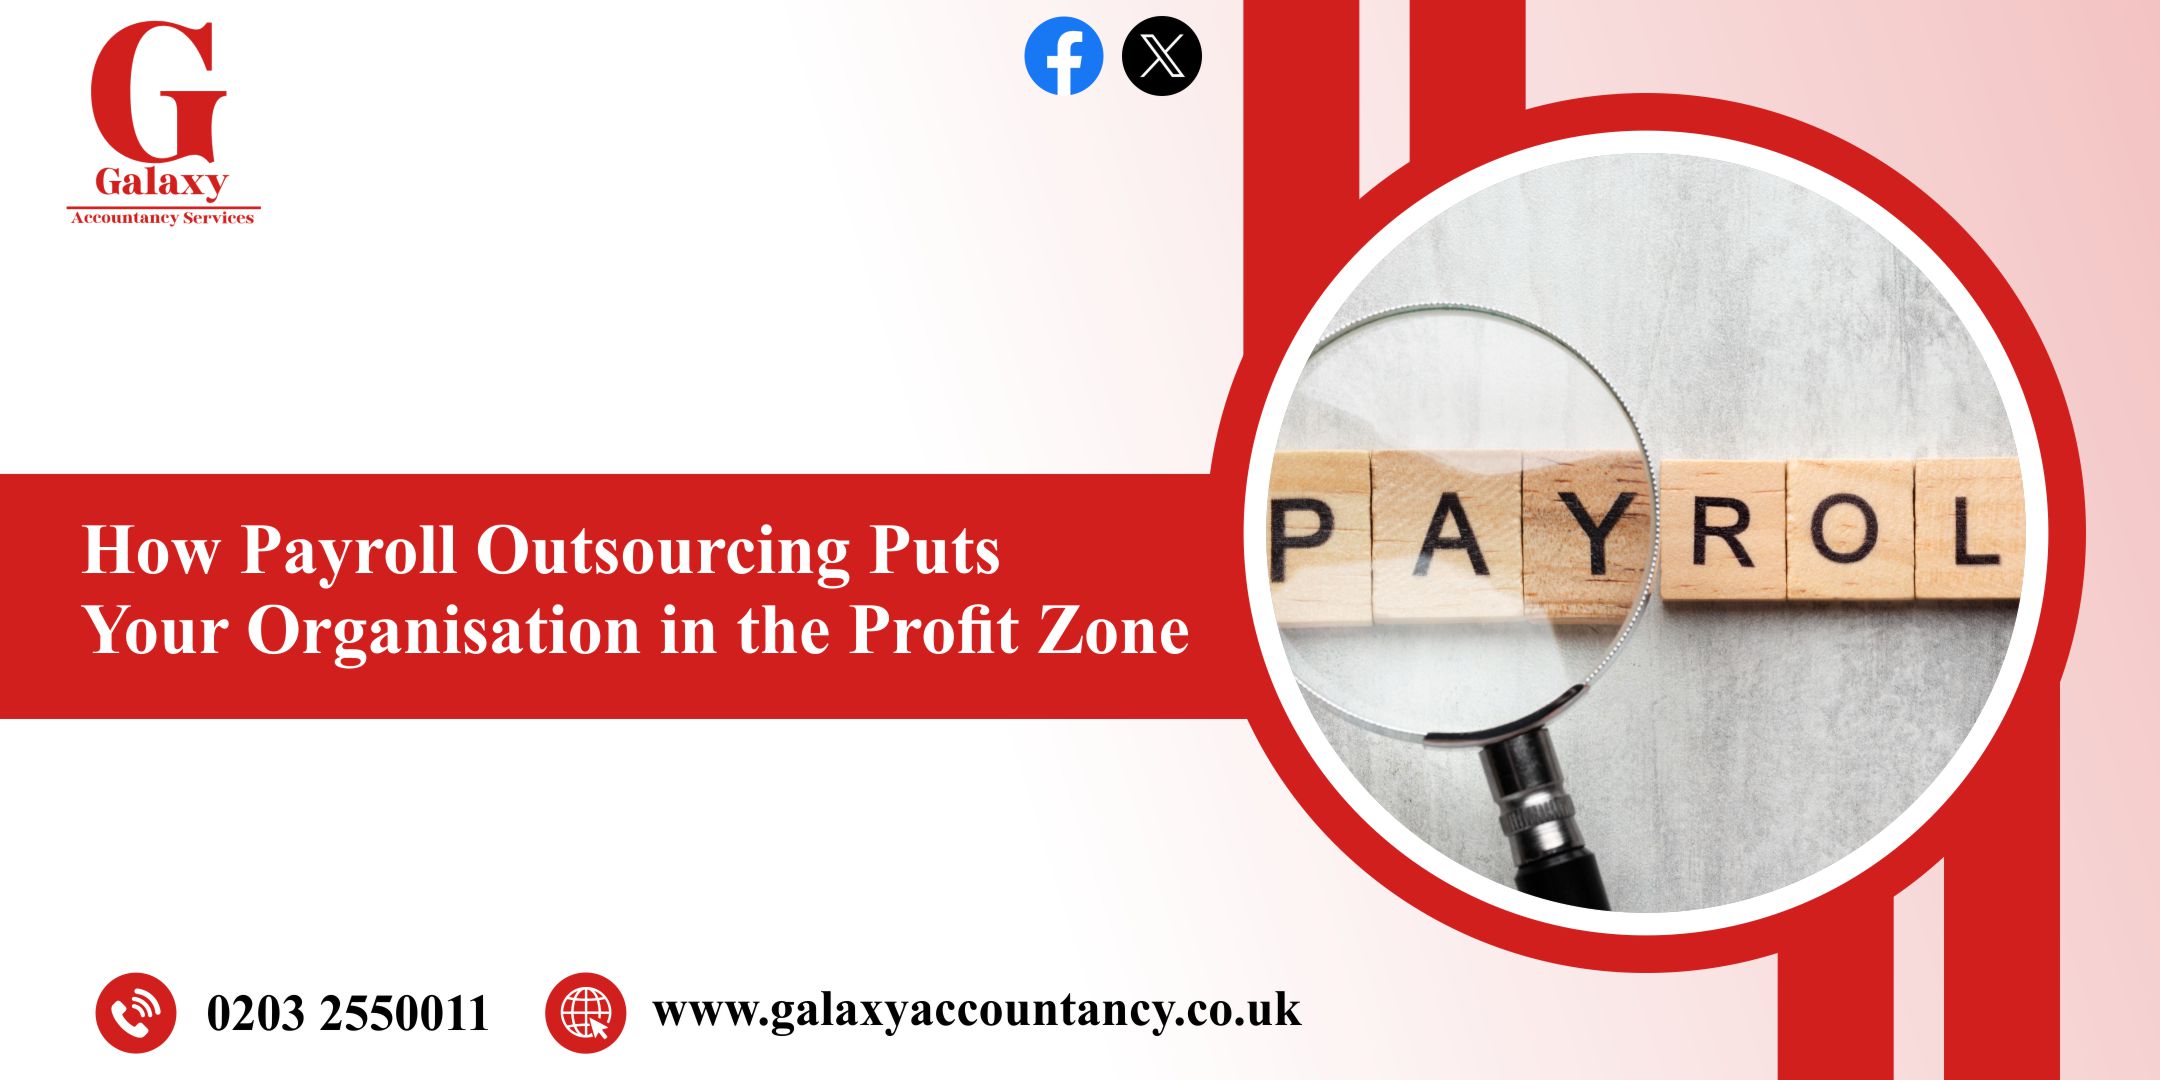 You are currently viewing How Payroll Outsourcing Puts Your Organisation in the Profit Zone